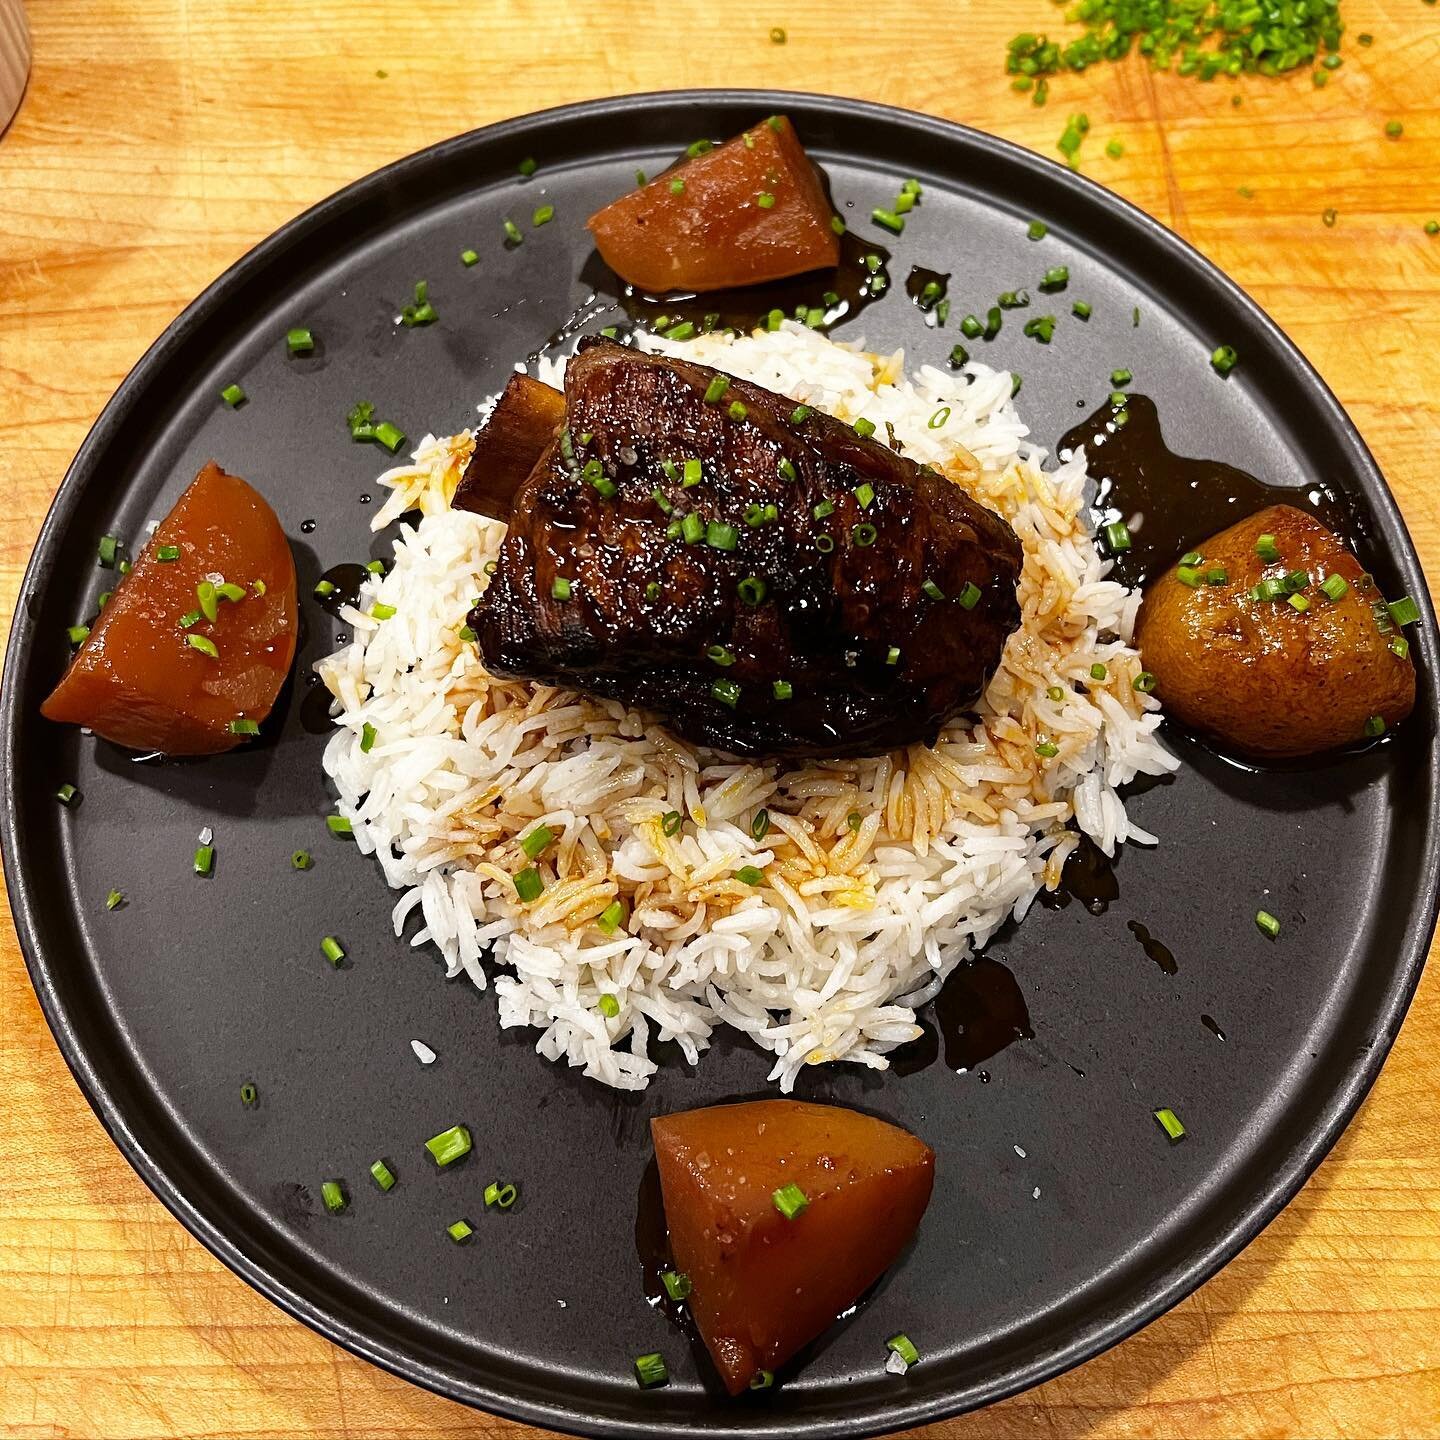 No hay chistes&hellip; Braised Short Ribs that changed my life. Served two ways. Mi amor.